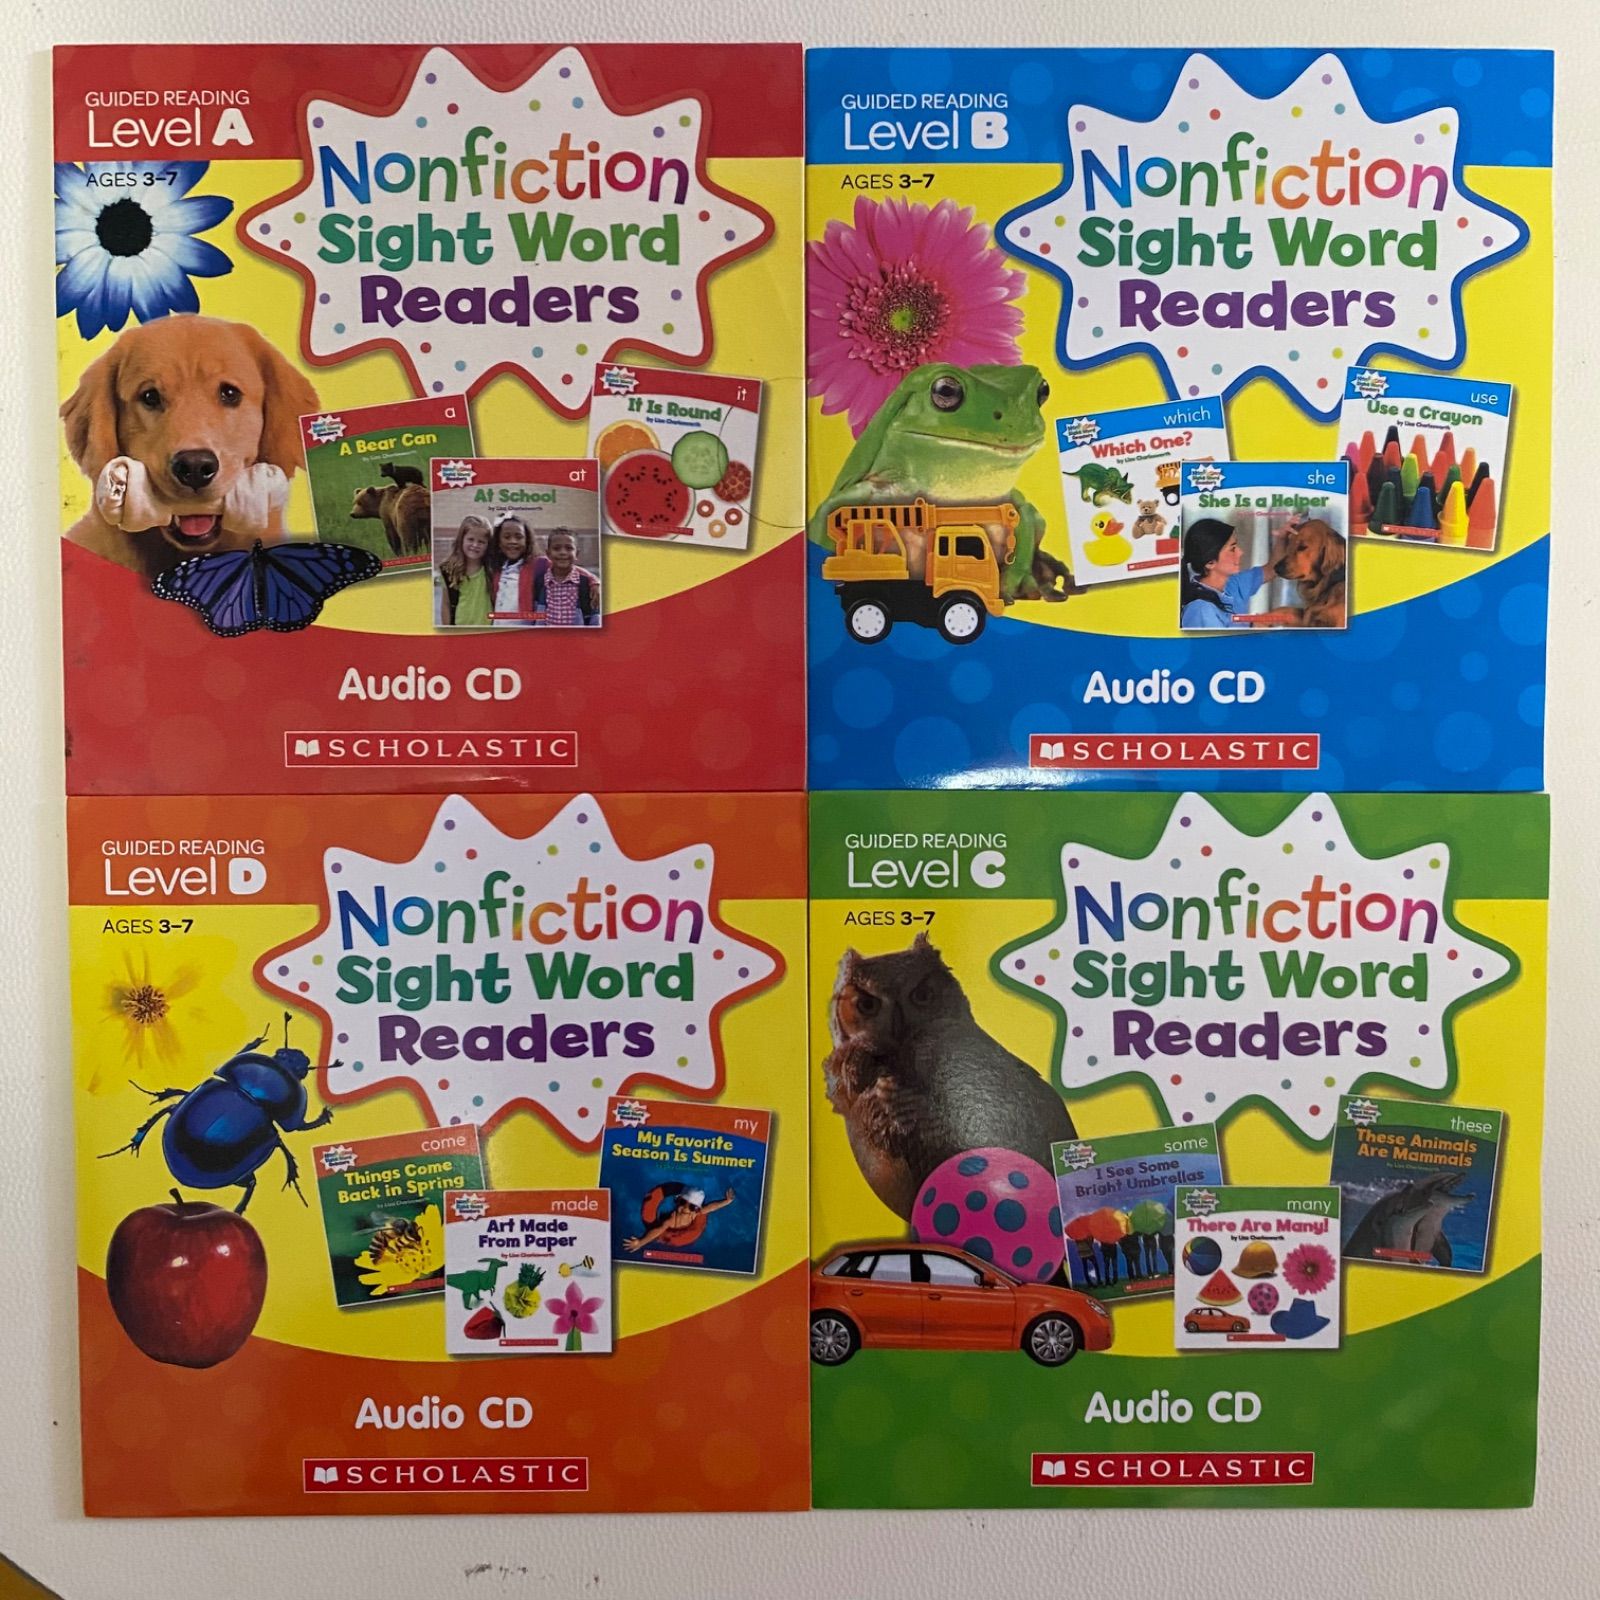 CTPマイヤペン対応Nonfiction Sight Word Reader 100冊